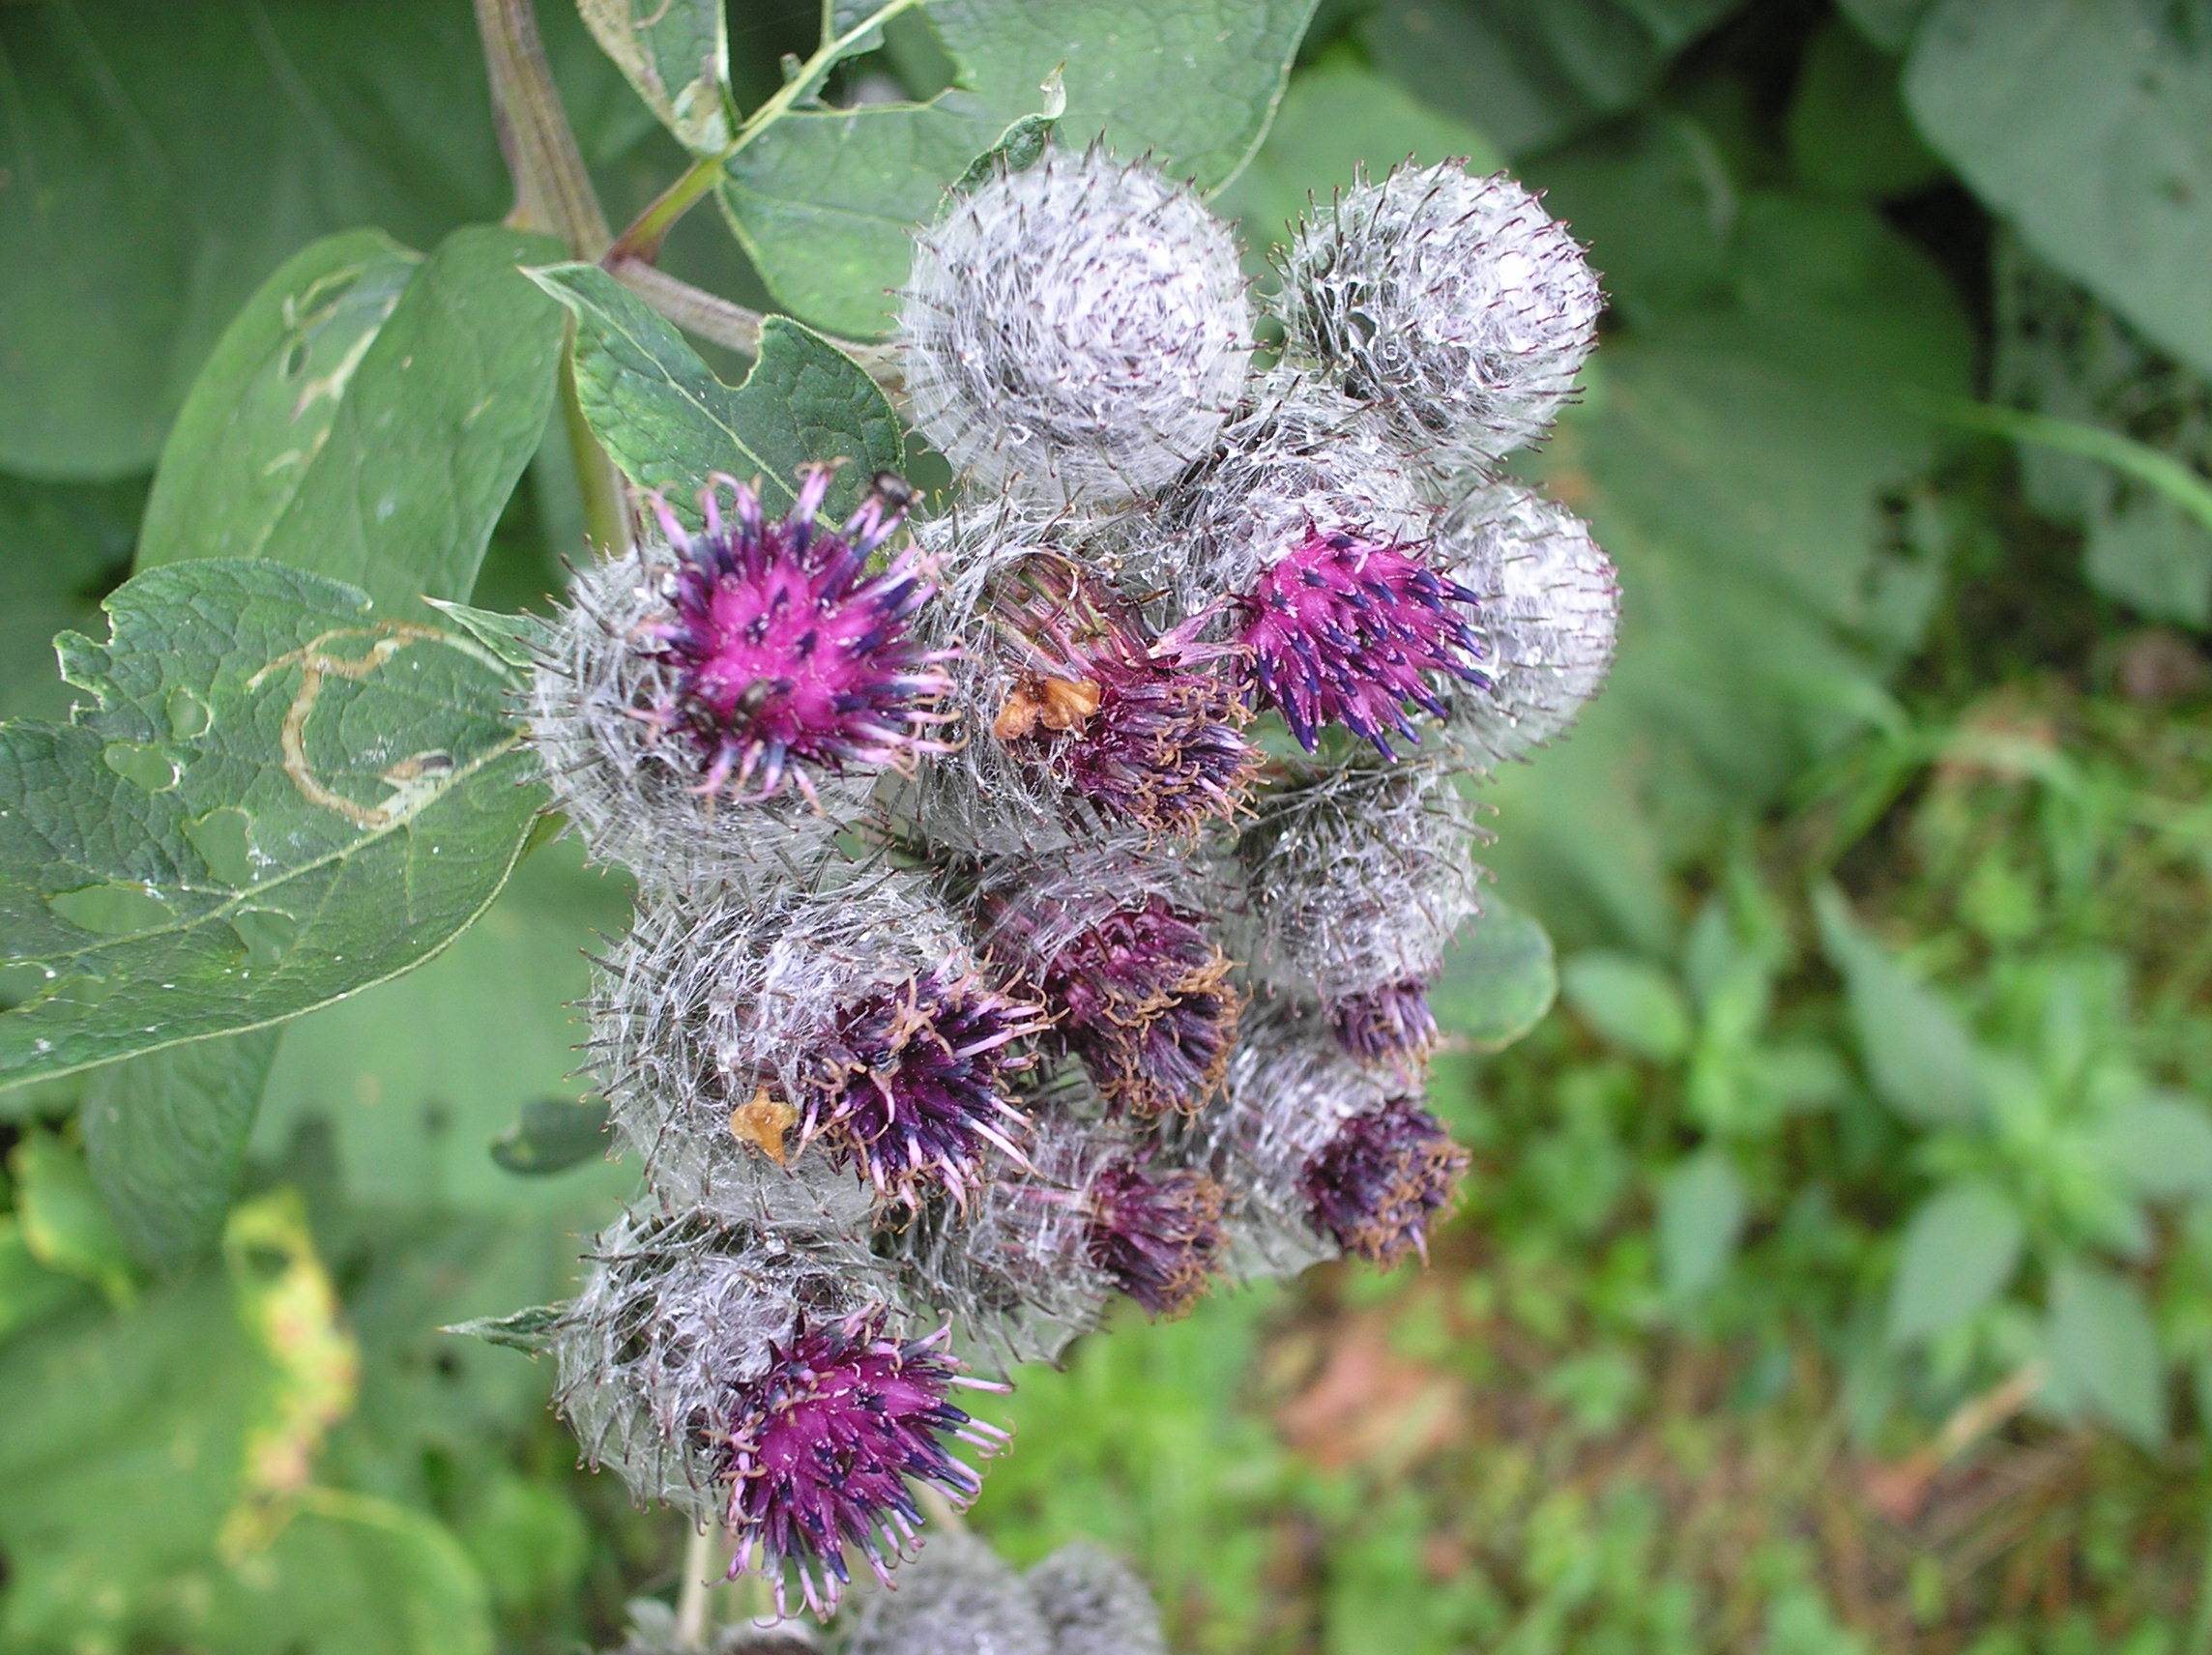 purple-grey flowers with green leaves on green-brown stems